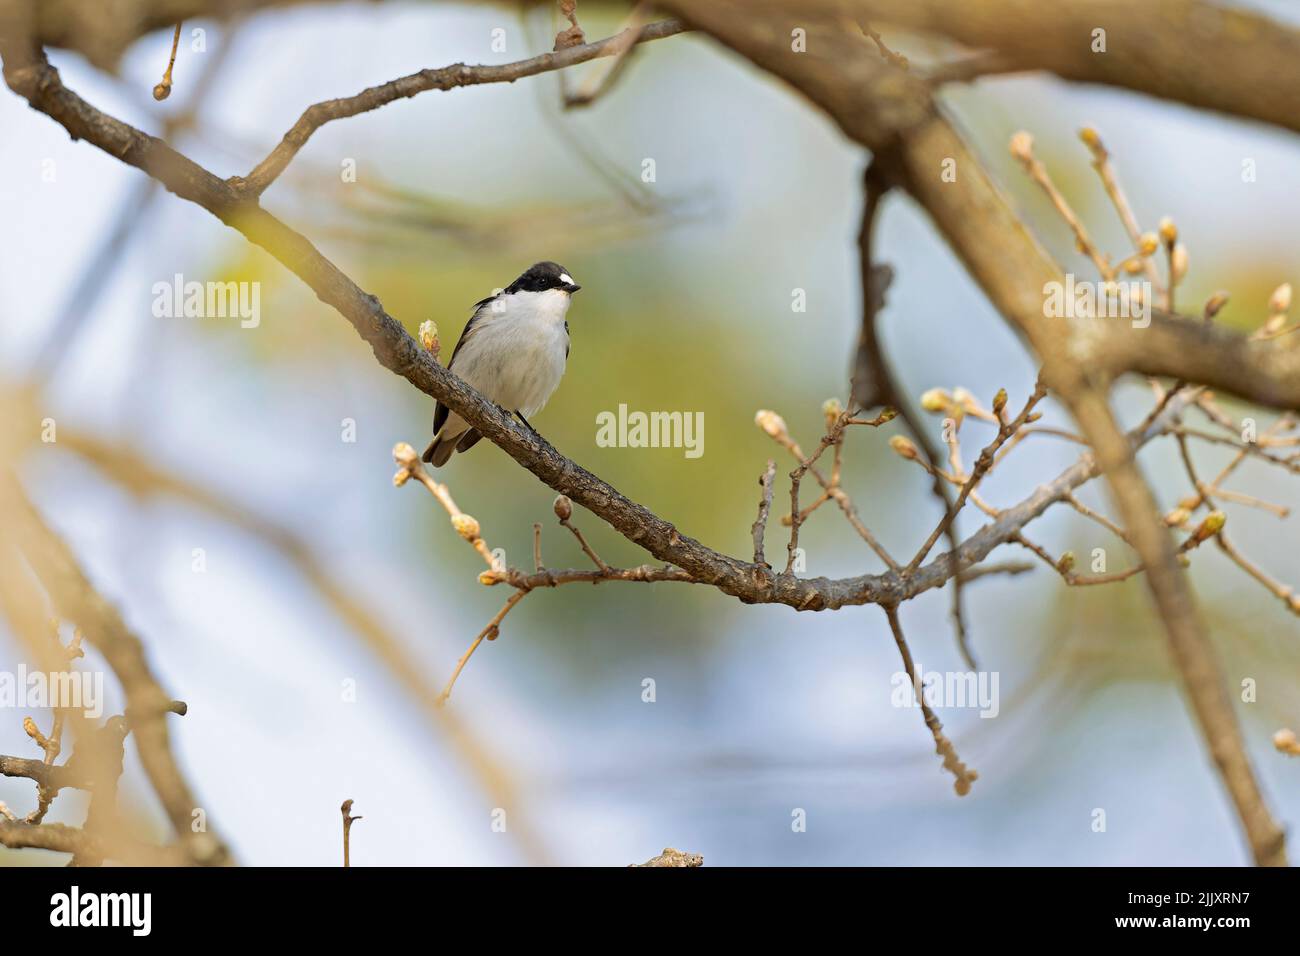 A male European pied flycatcher (Ficedula hypoleuca) perched on a branch. Stock Photo